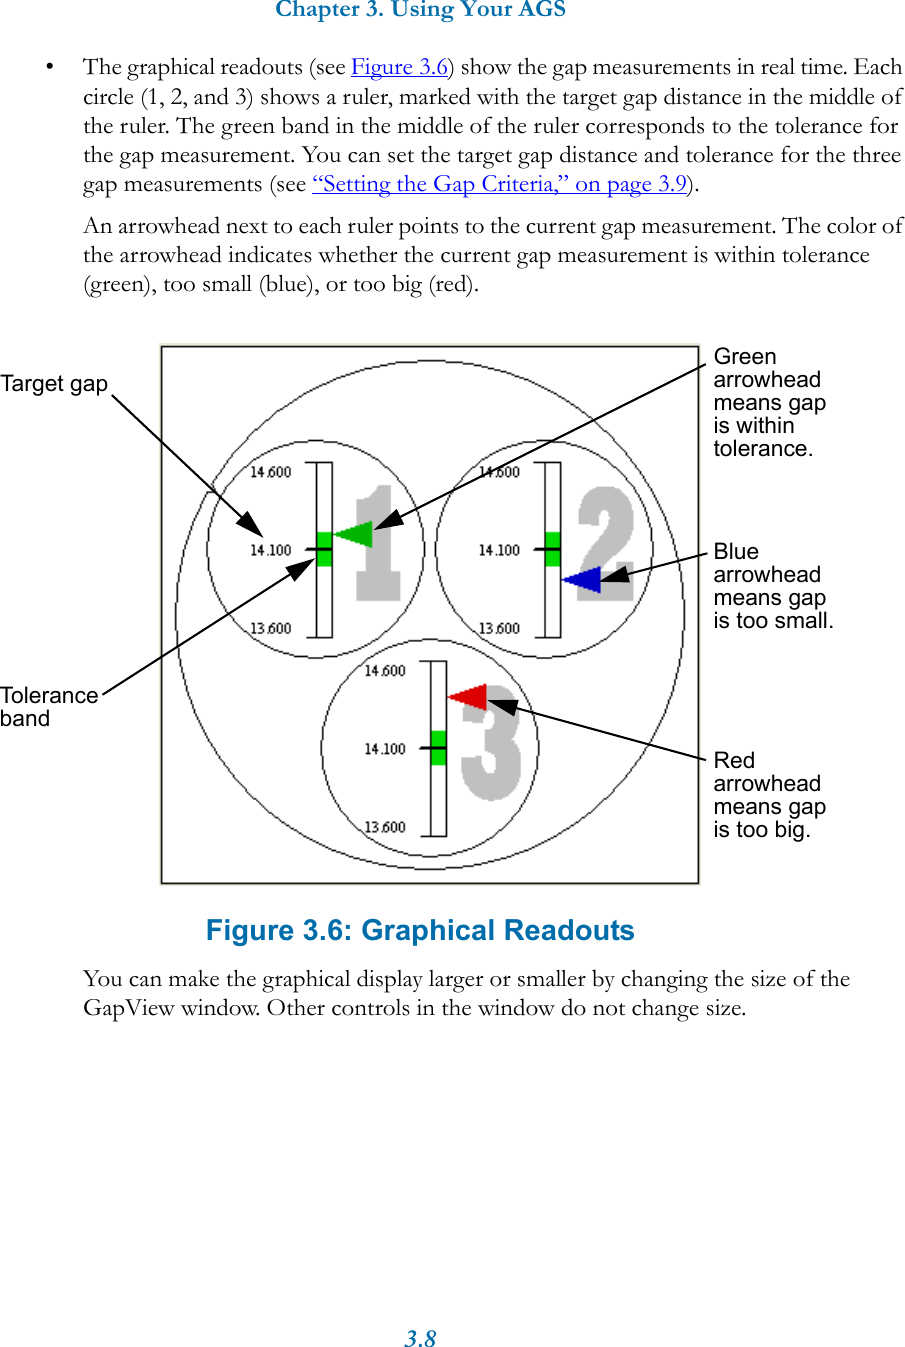 Chapter 3. Using Your AGS3.8• The graphical readouts (see Figure 3.6) show the gap measurements in real time. Each circle (1, 2, and 3) shows a ruler, marked with the target gap distance in the middle of the ruler. The green band in the middle of the ruler corresponds to the tolerance for the gap measurement. You can set the target gap distance and tolerance for the three gap measurements (see “Setting the Gap Criteria,” on page 3.9).An arrowhead next to each ruler points to the current gap measurement. The color of the arrowhead indicates whether the current gap measurement is within tolerance (green), too small (blue), or too big (red). Figure 3.6: Graphical ReadoutsYou can make the graphical display larger or smaller by changing the size of the GapView window. Other controls in the window do not change size.Target gapRed arrowhead means gap is too big.Green arrowhead means gap is within tolerance.TolerancebandBlue arrowhead means gap is too small.